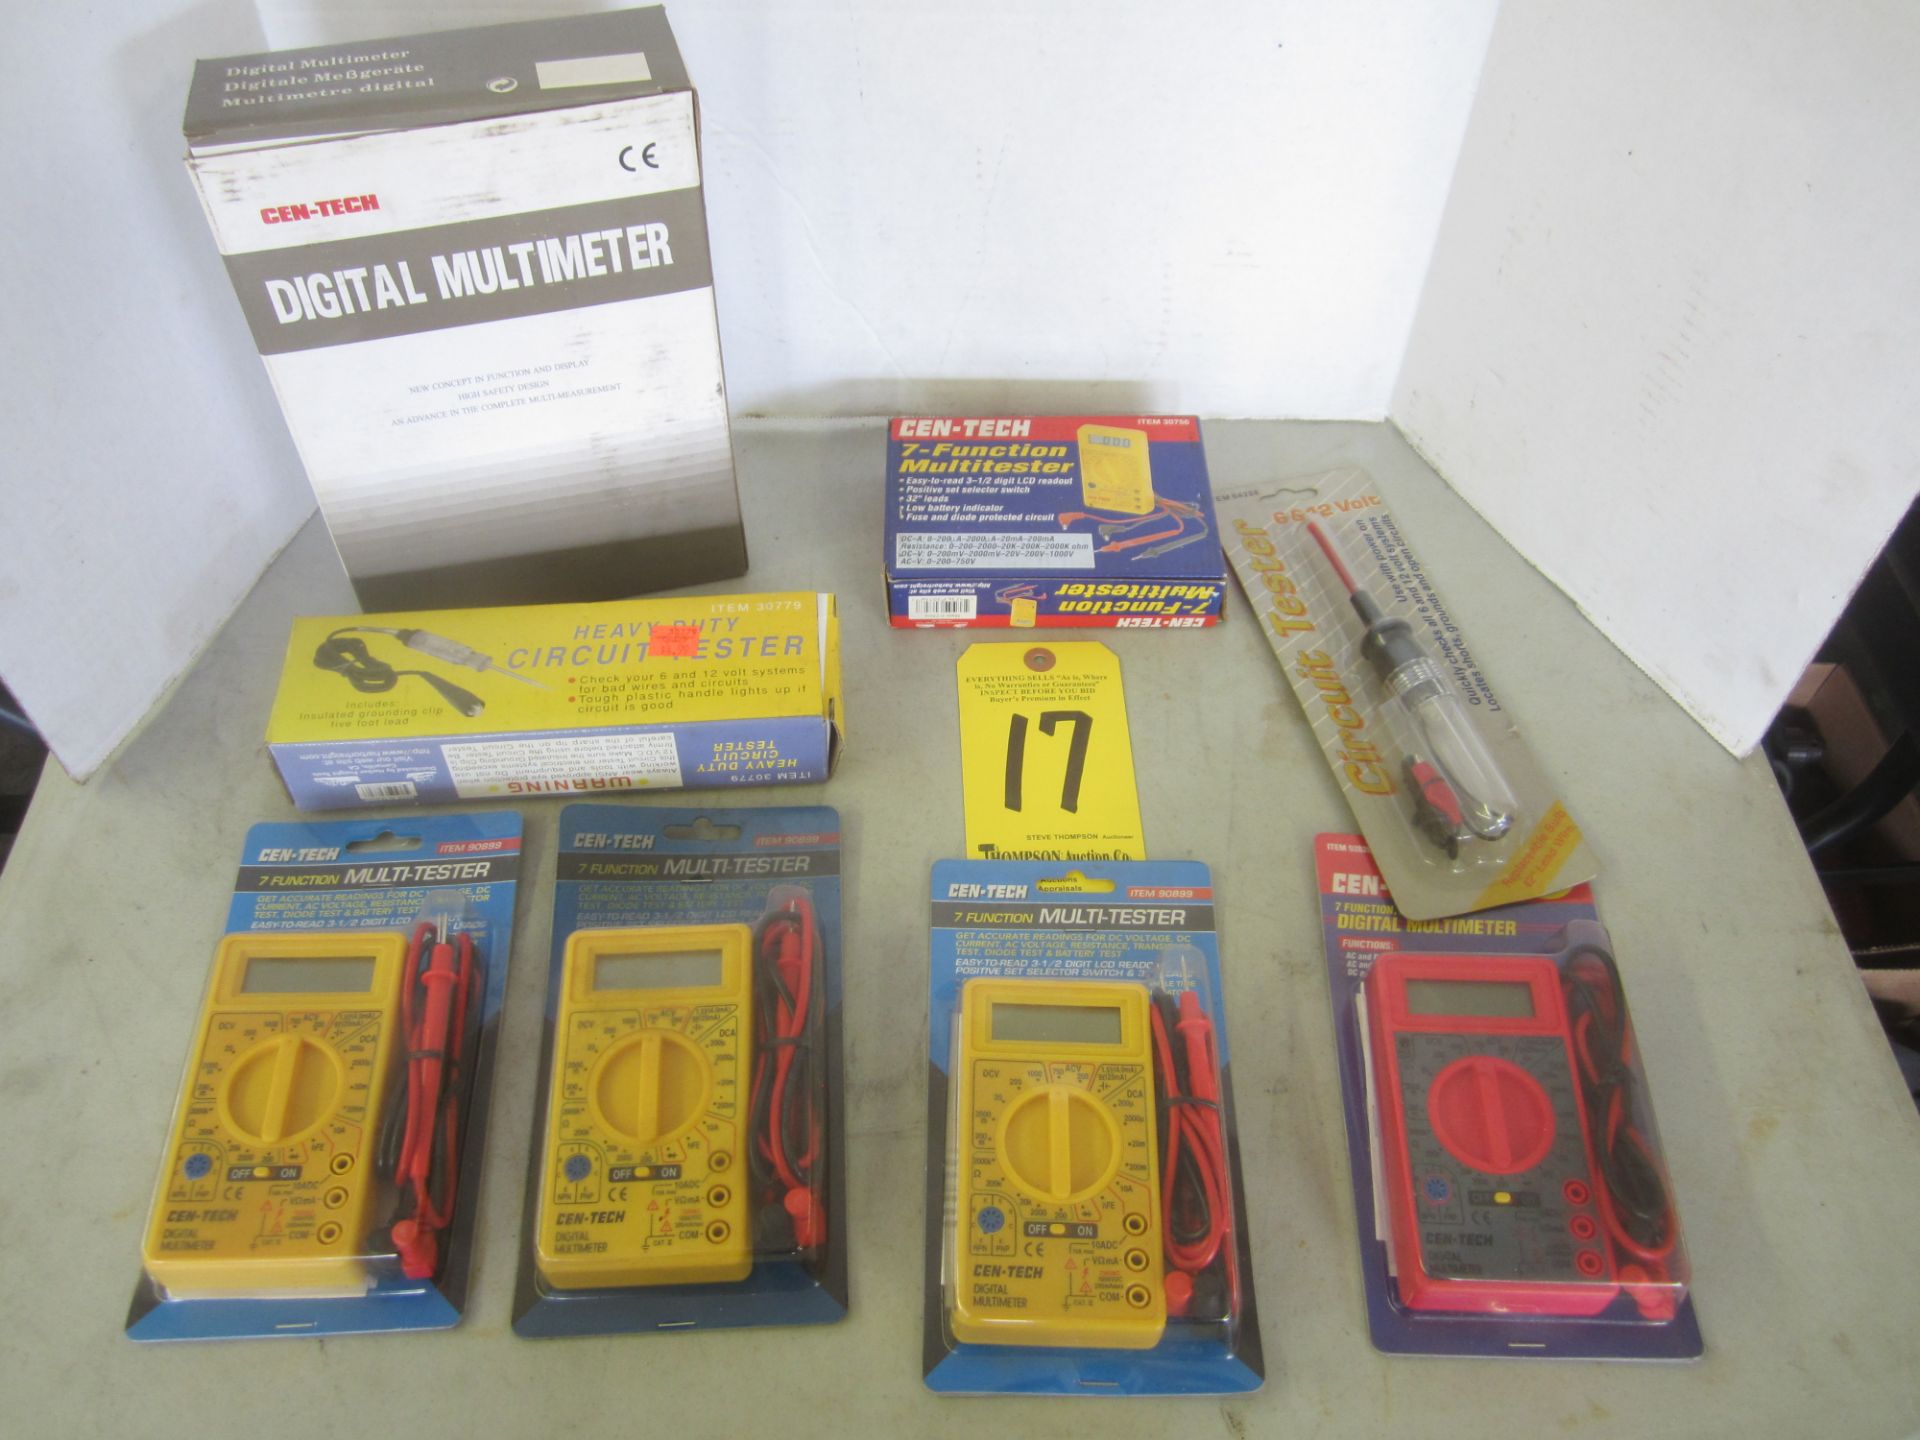 Misc. Multimeters and Electrical Test Equipment